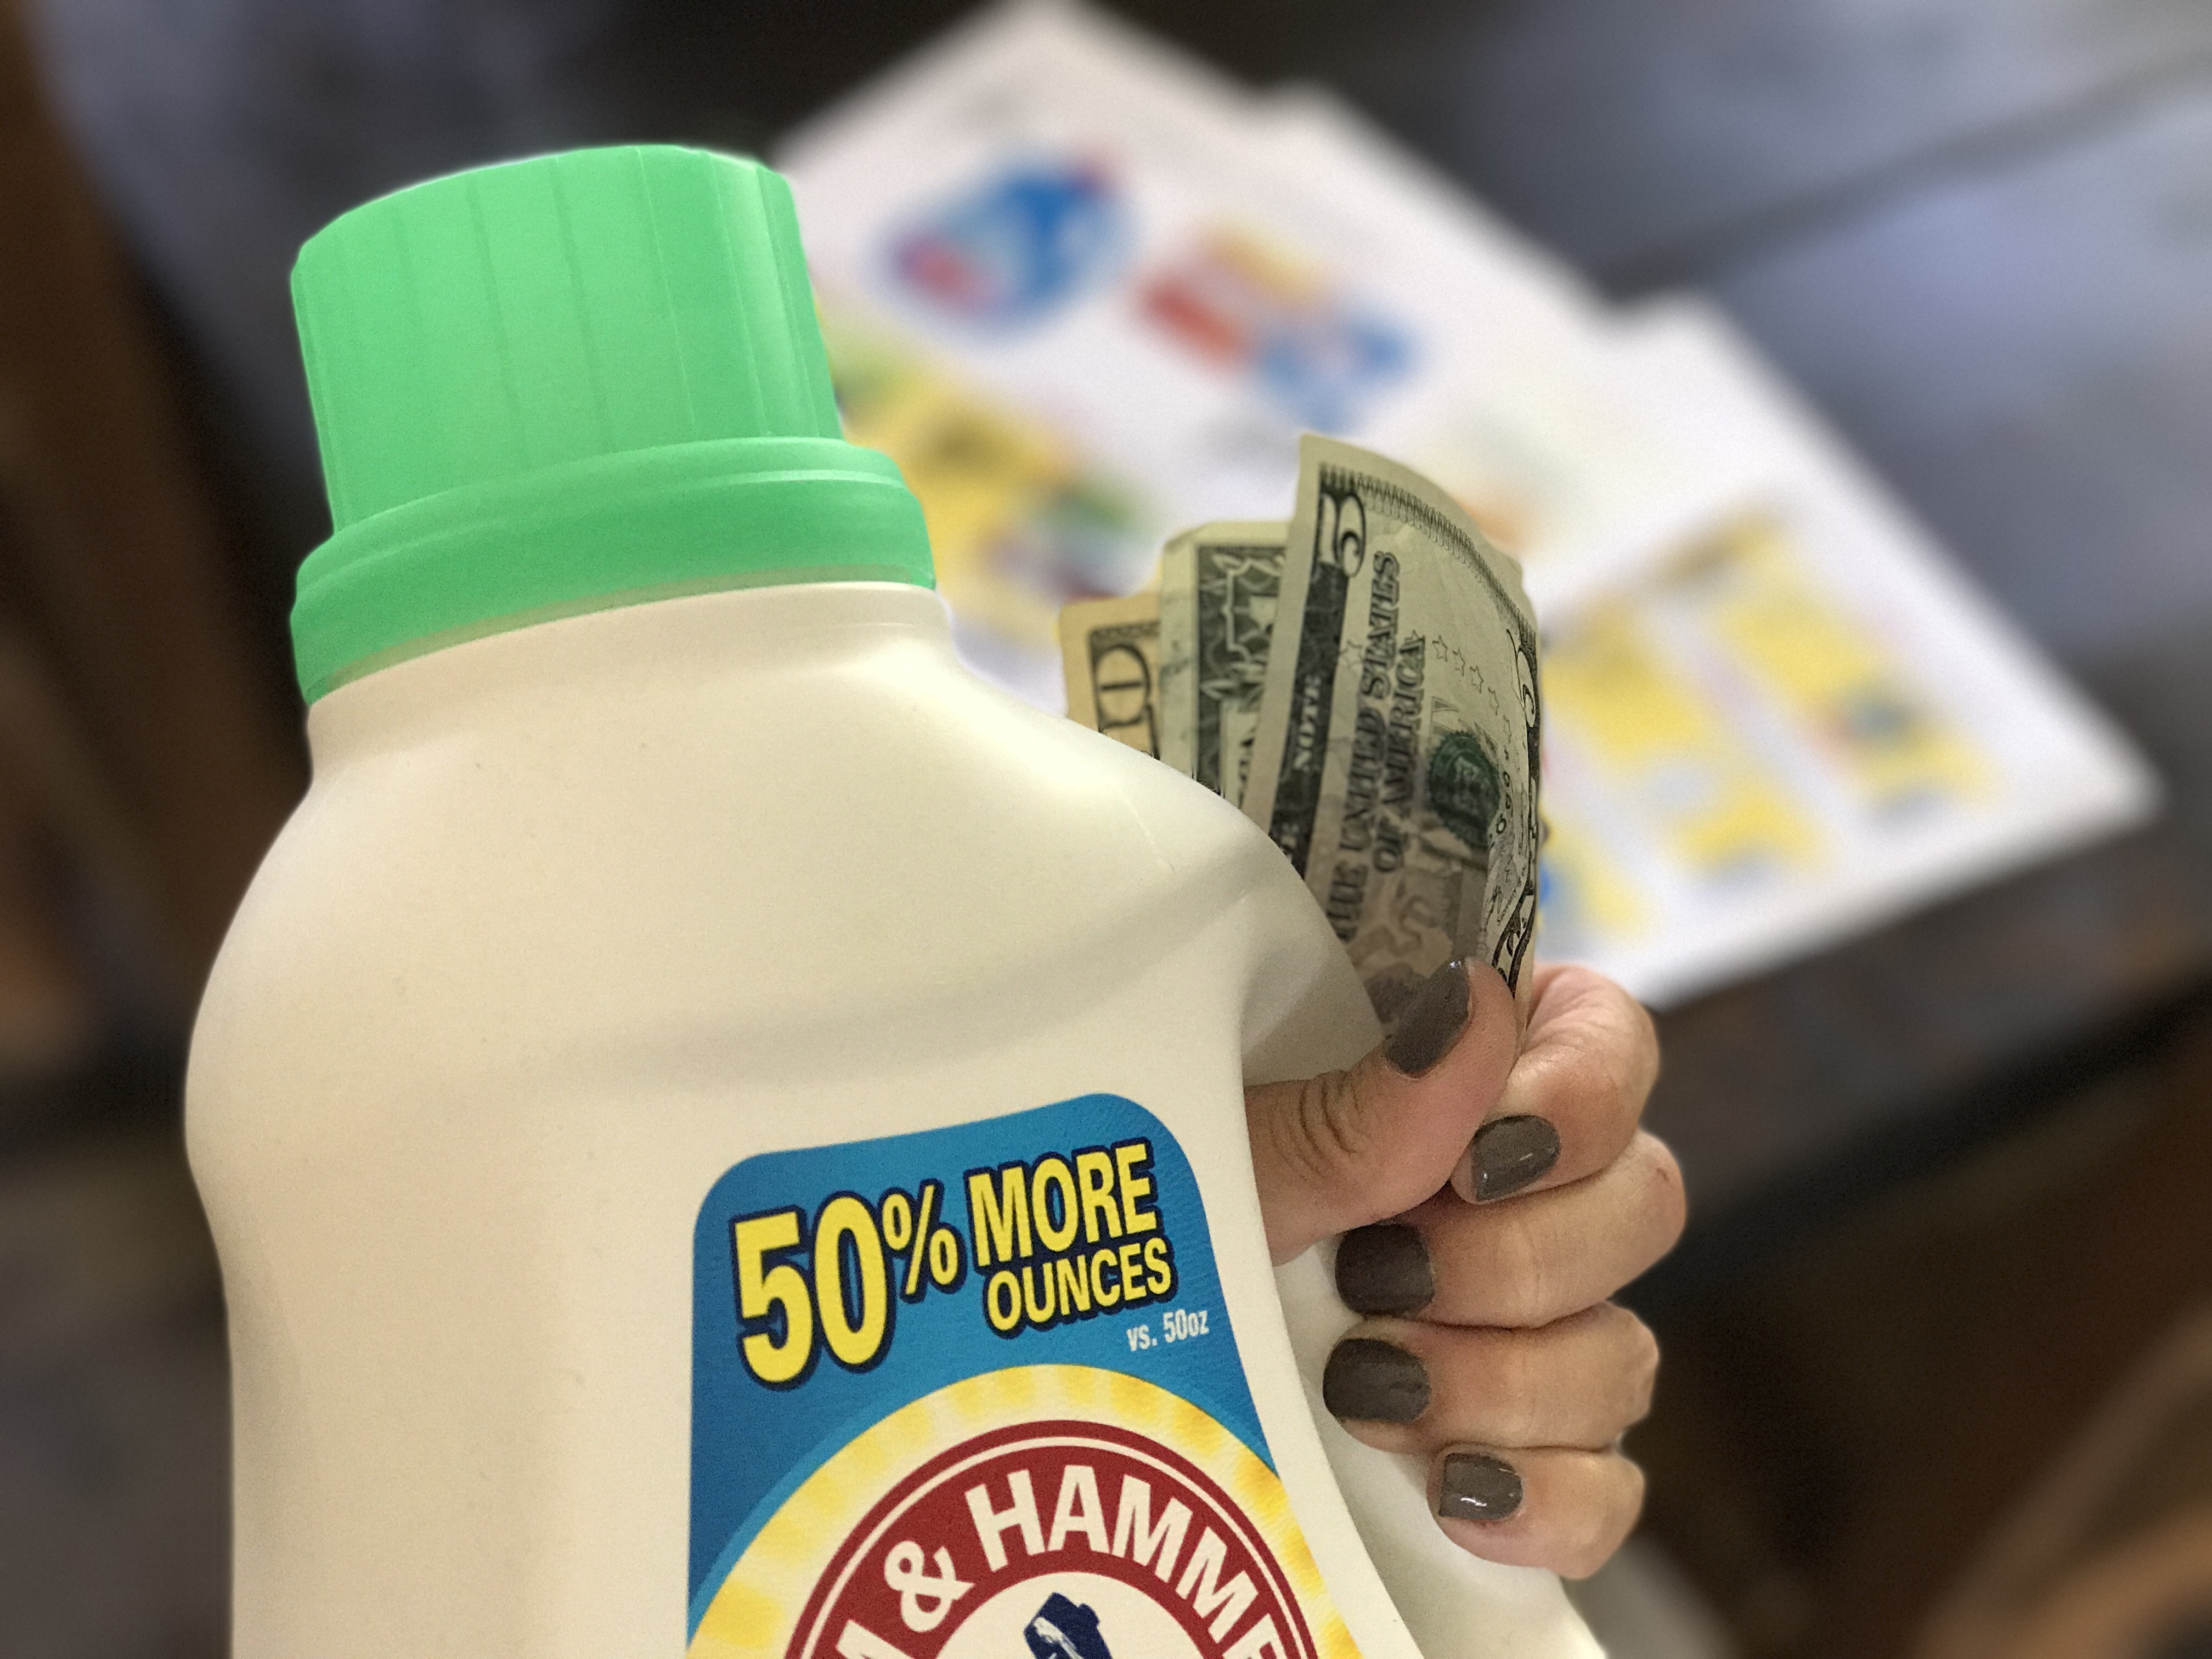 Free Printable Gain Laundry Detergent Coupons Free Printable